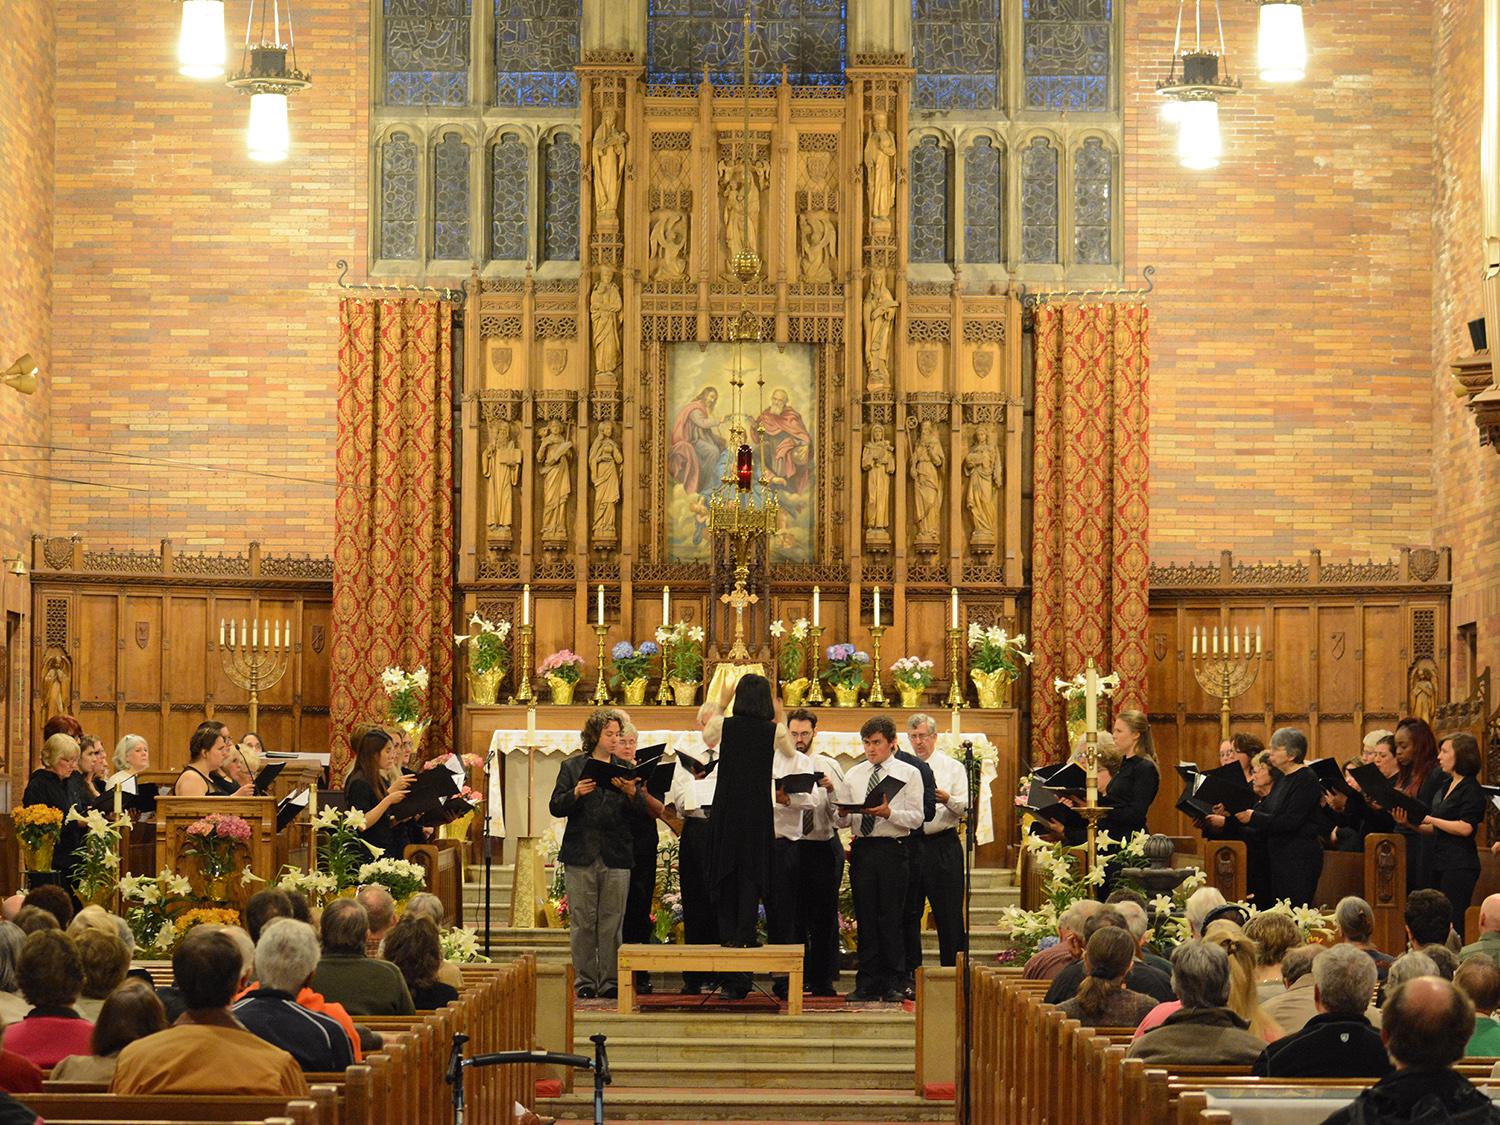 Festival Chorus performs at St. Mary's church